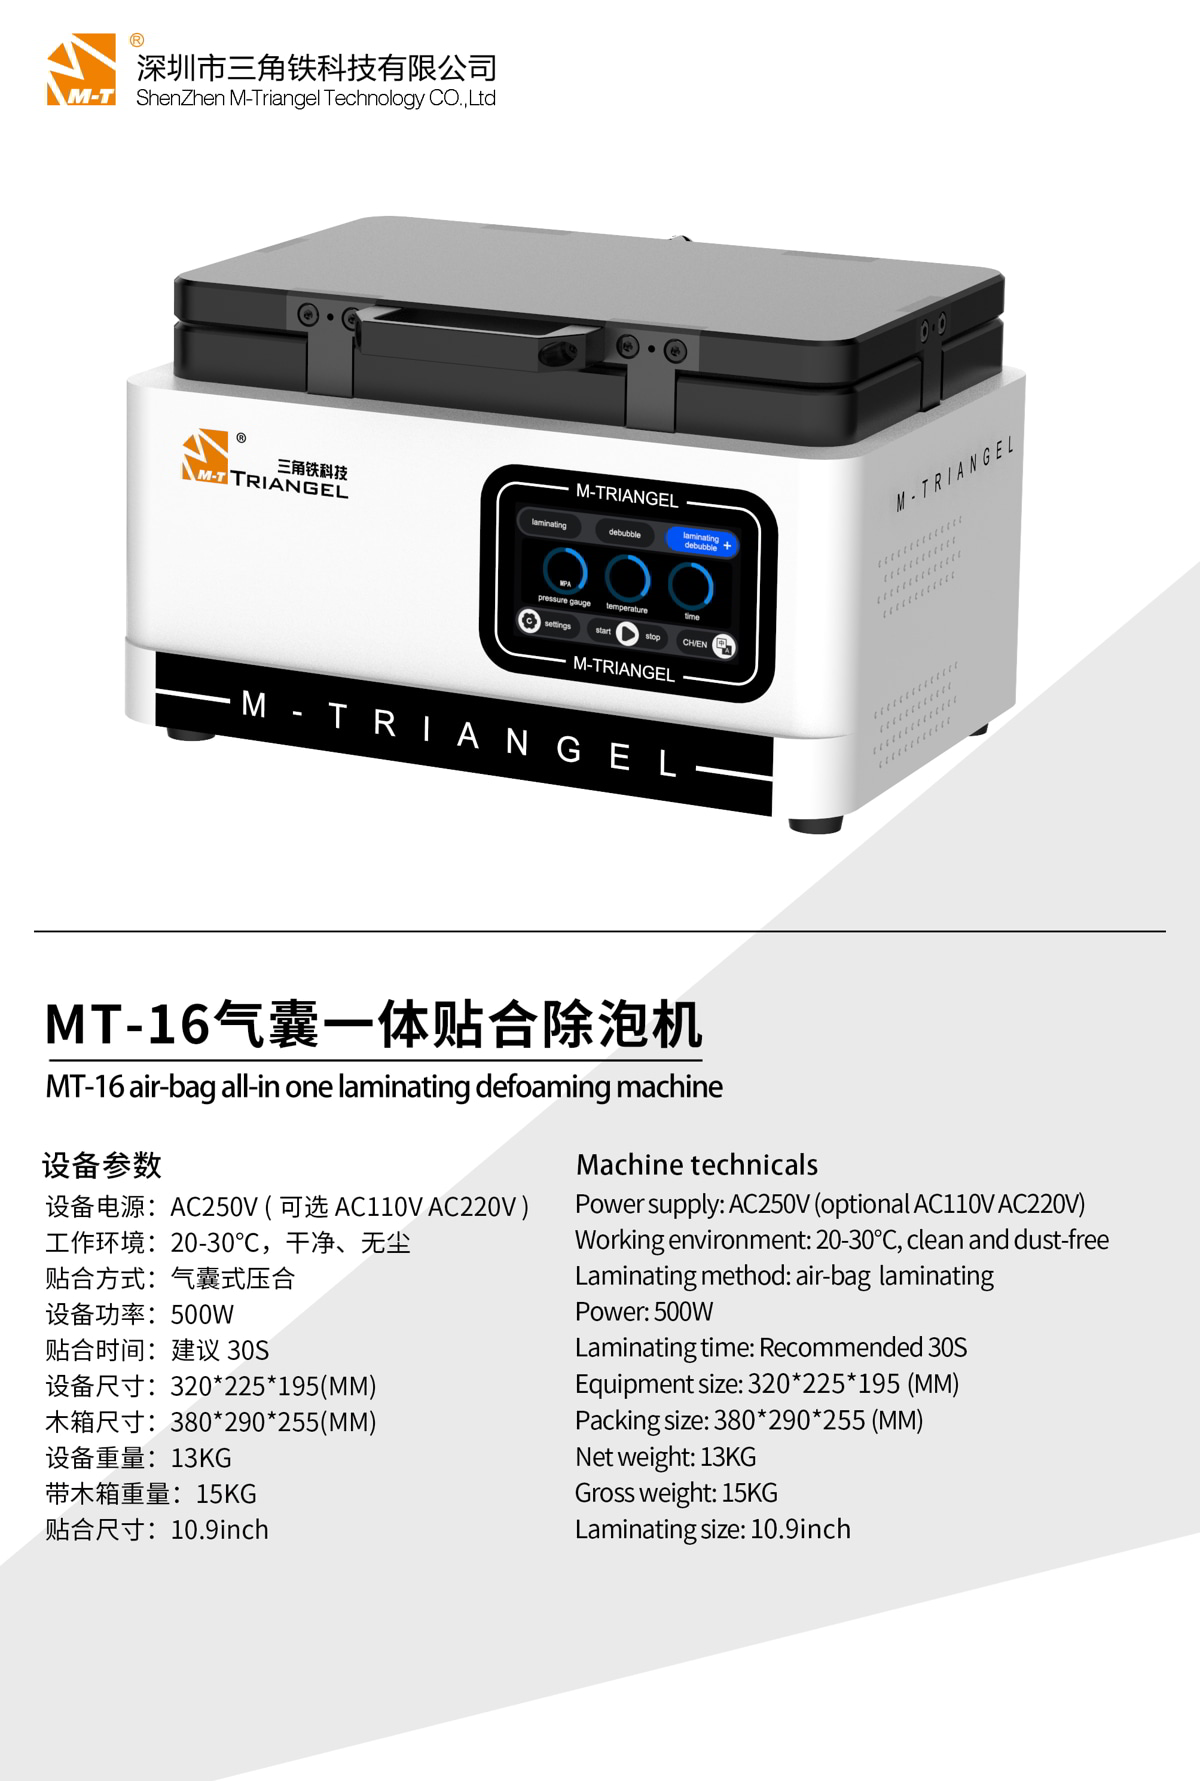 mt 16 specification